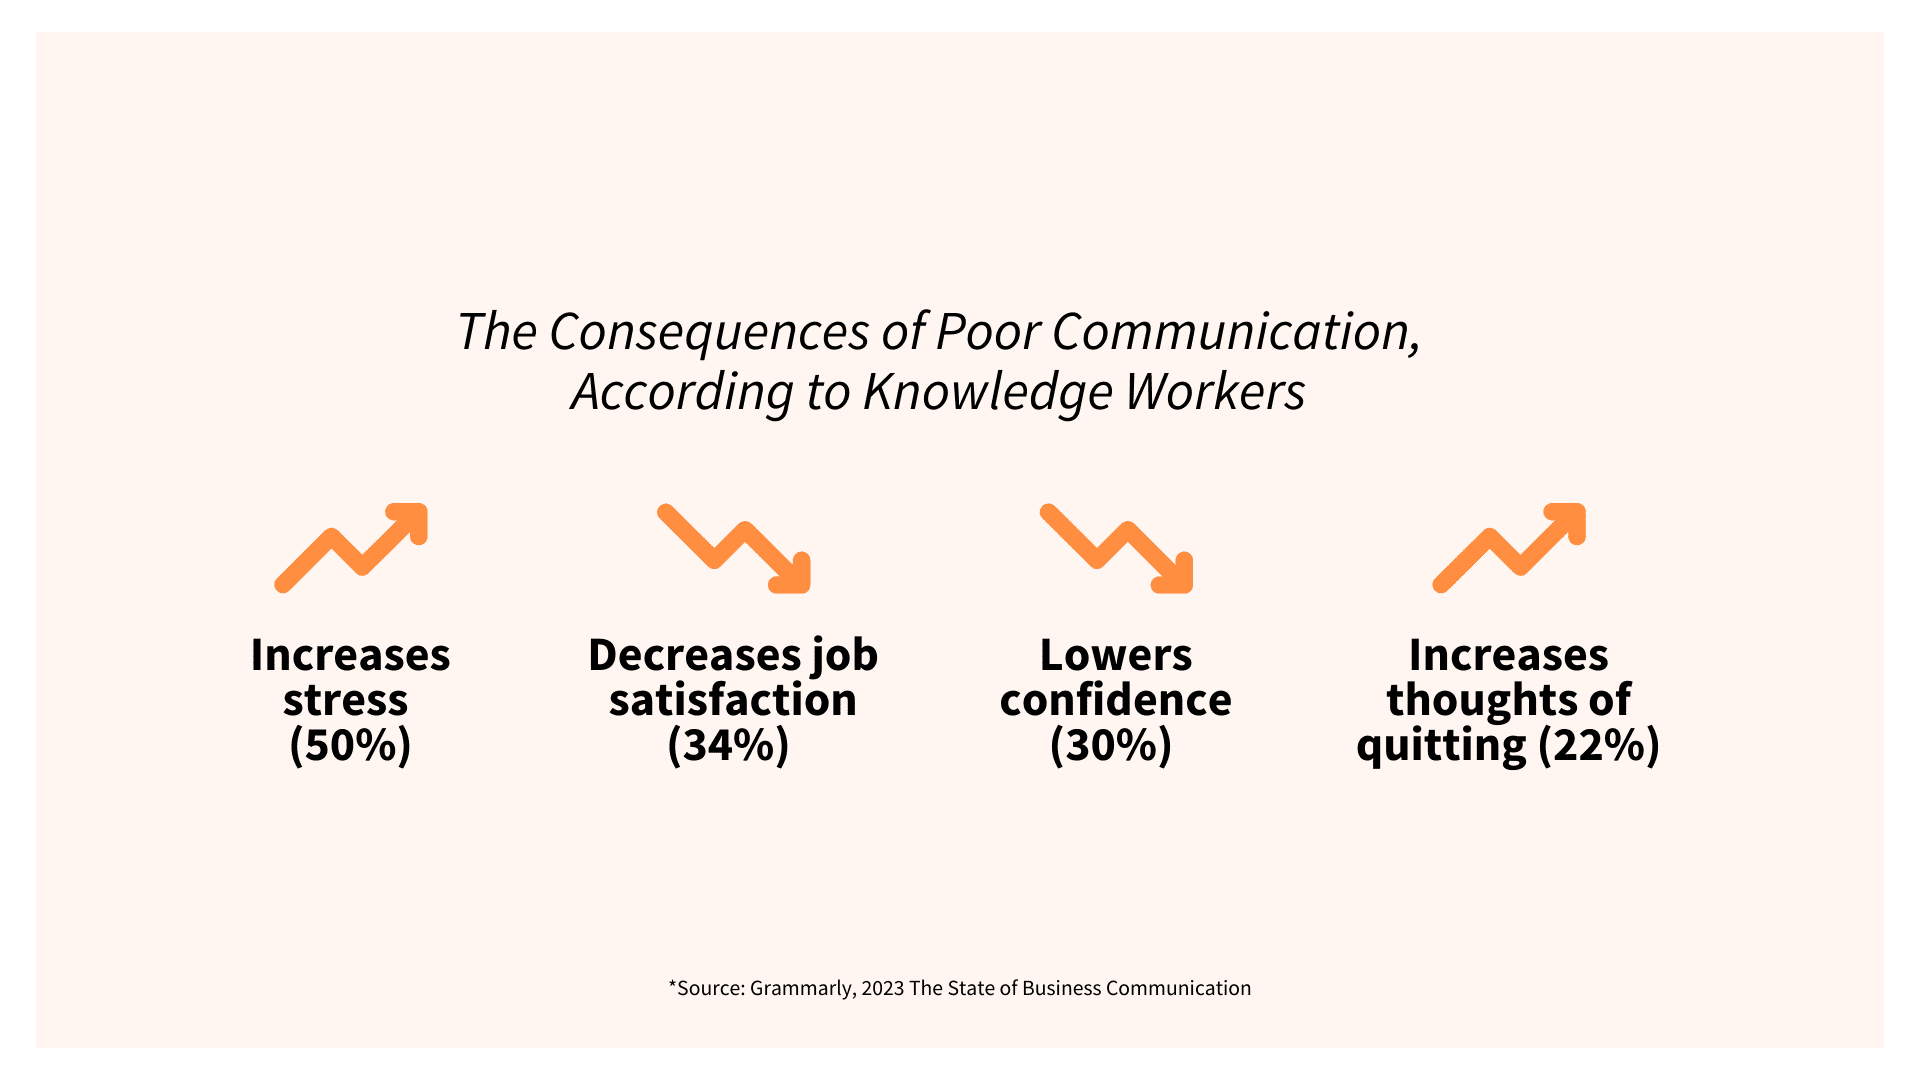 The Consequences of Poor Communication According to Knowledge Workers